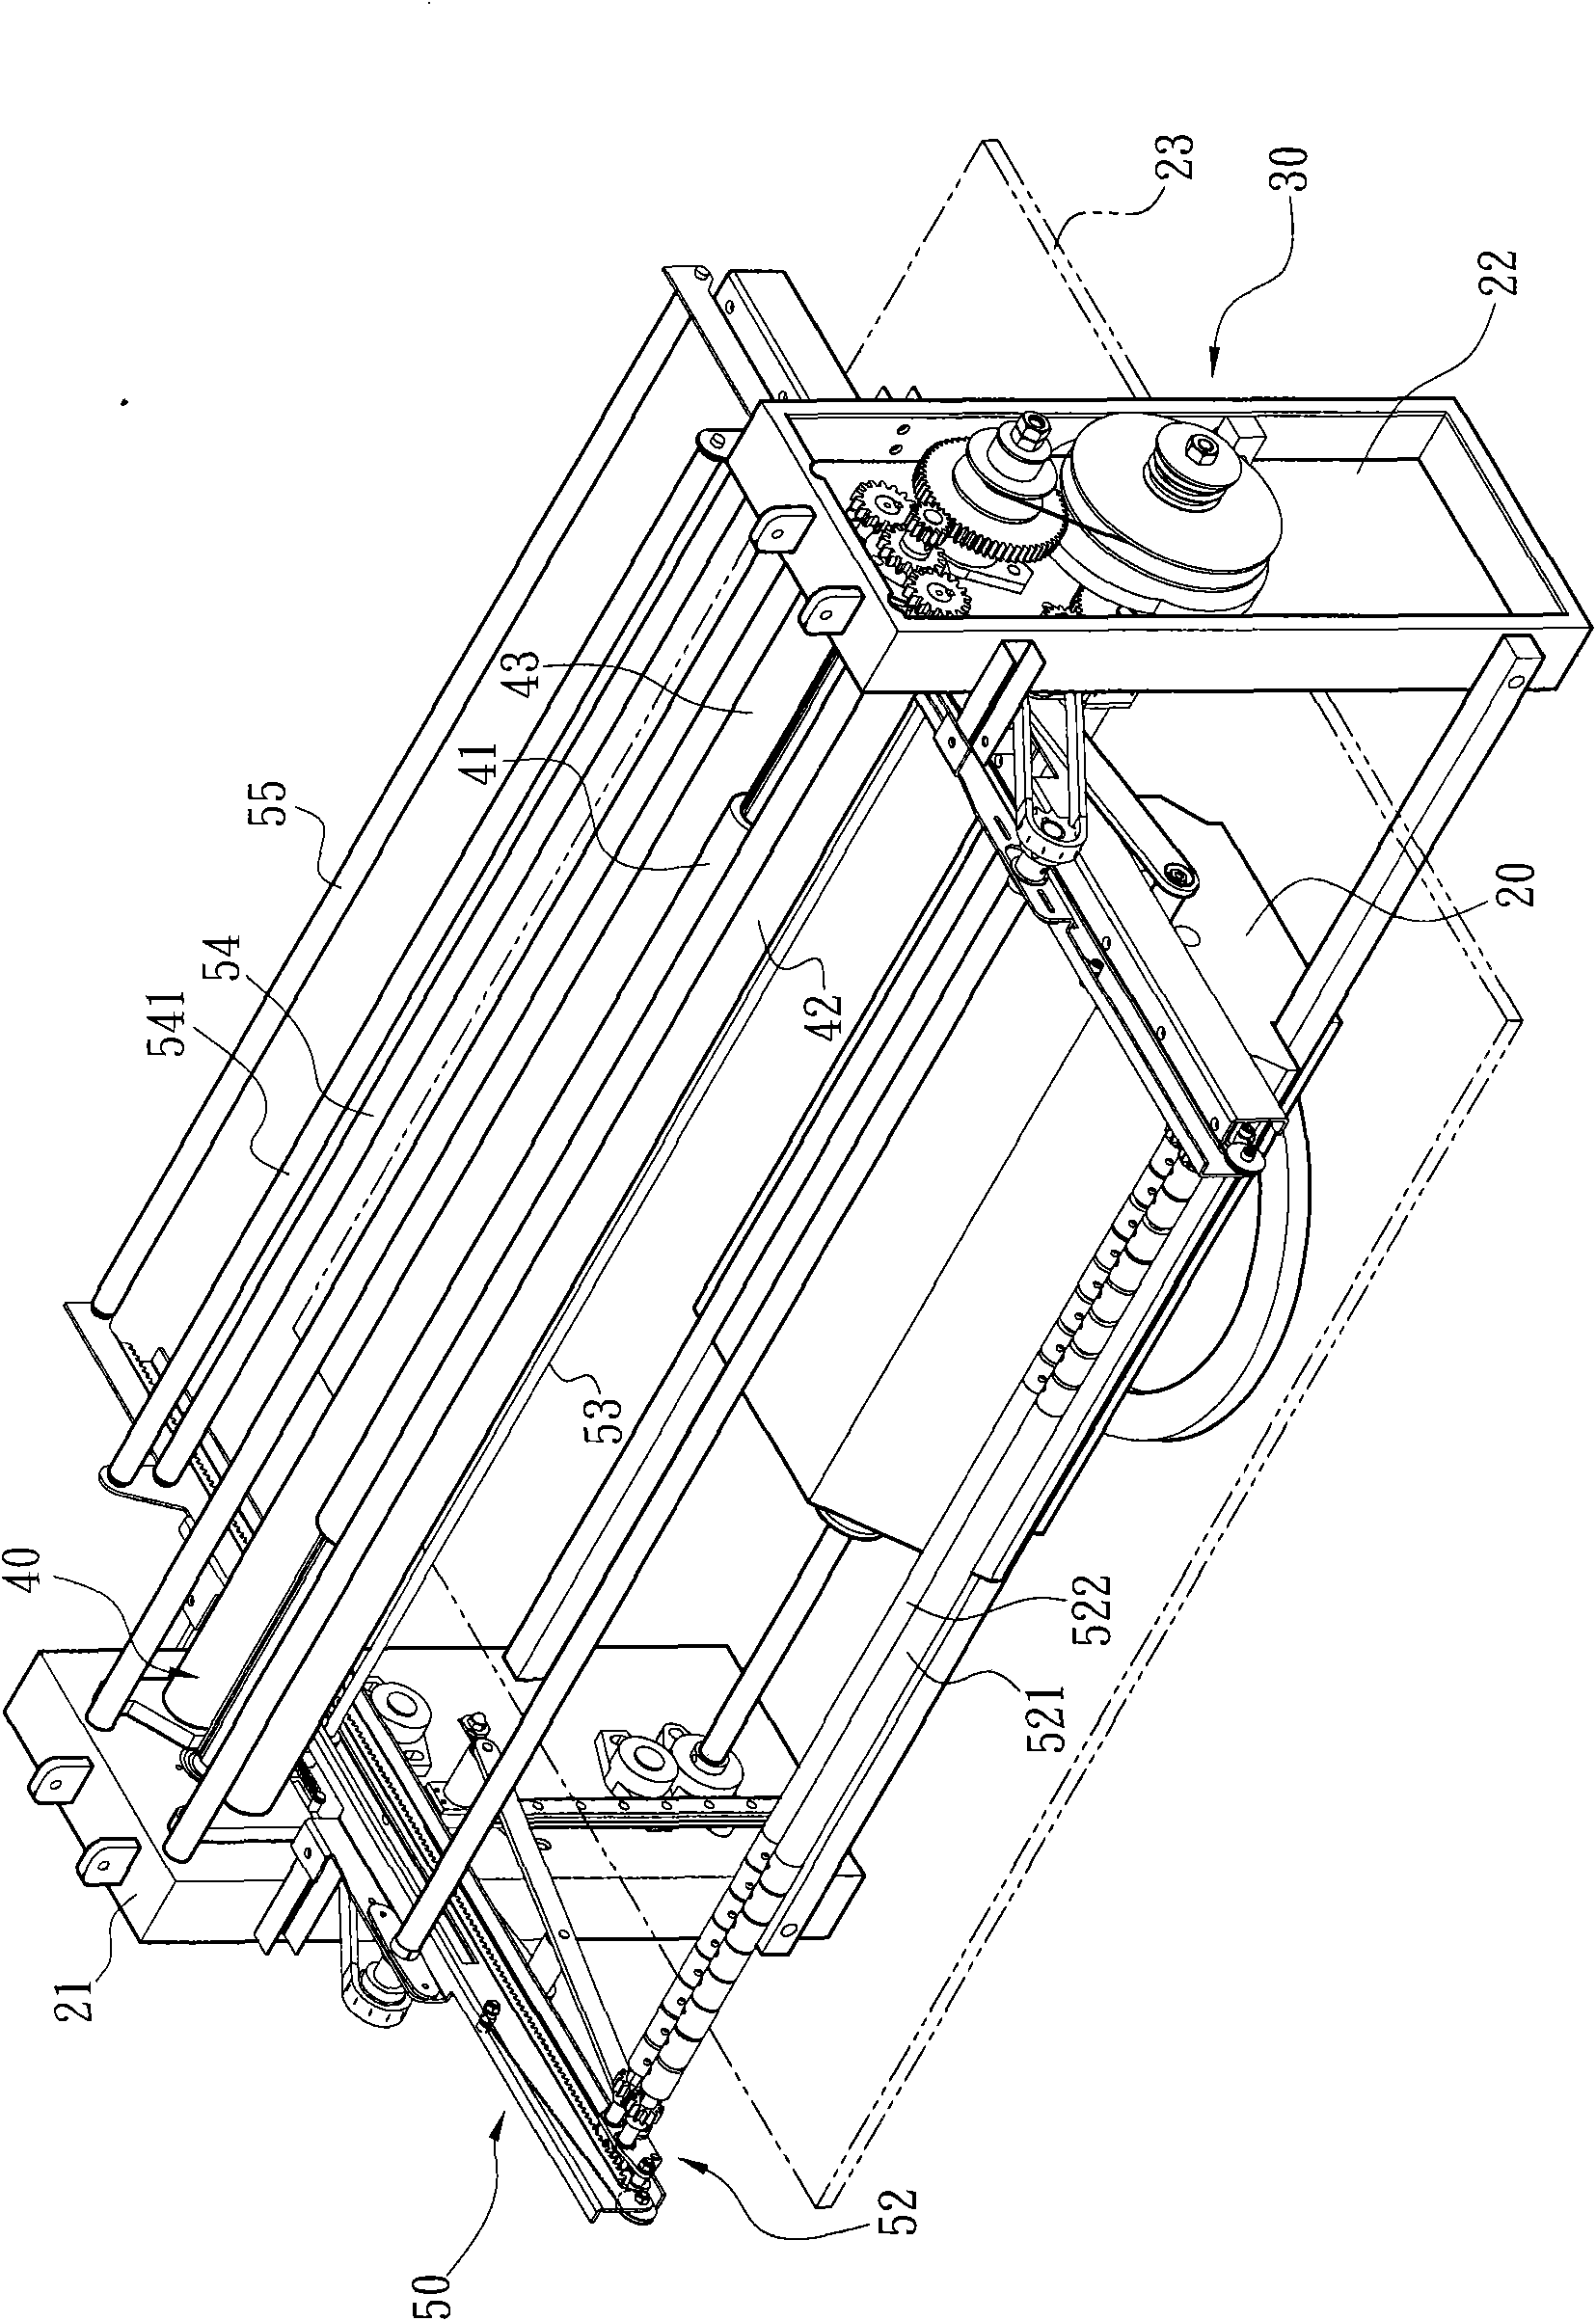 Method and mechanism for equivalently lowering and folding cloth woven by circular knitting machine according to cloth quantity